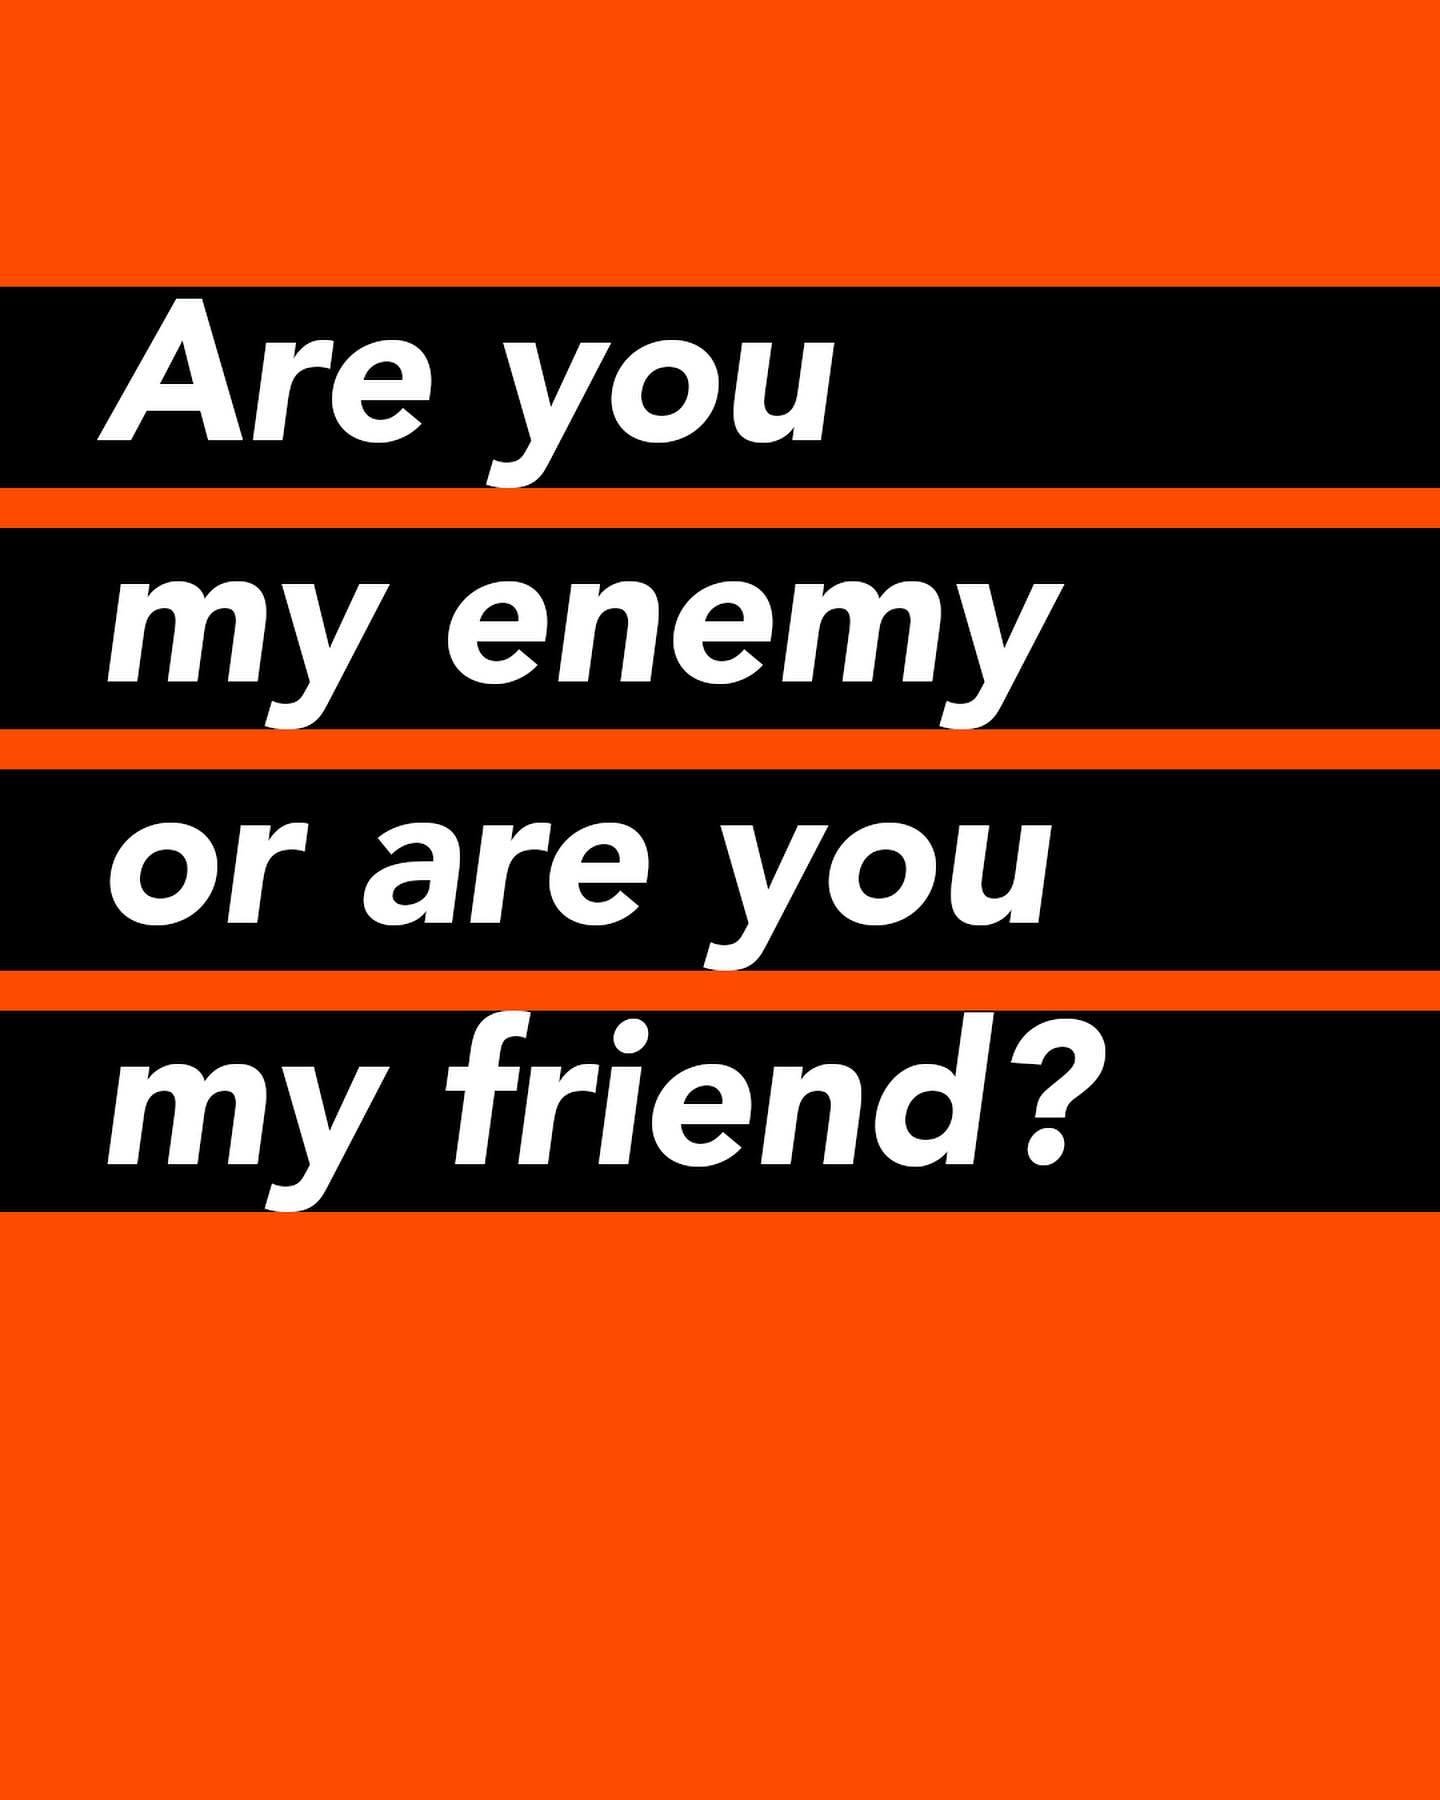 &mdash;⁣⁣⁣⁣⁣⁣⁣⁣⁣⁣⁣⁣⁣
Are you my enemy or are you my friend?

Please comment with your answer. Please also direct message me your postal mailing address. &mdash;⁣⁣⁣⁣⁣⁣⁣⁣⁣⁣⁣⁣⁣⁣⁣⁣⁣⁣⁣⁣⁣⁣⁣⁣⁣⁣ #art #davidgregharth #harth #newyorkcity #nyc #brooklyn #concep